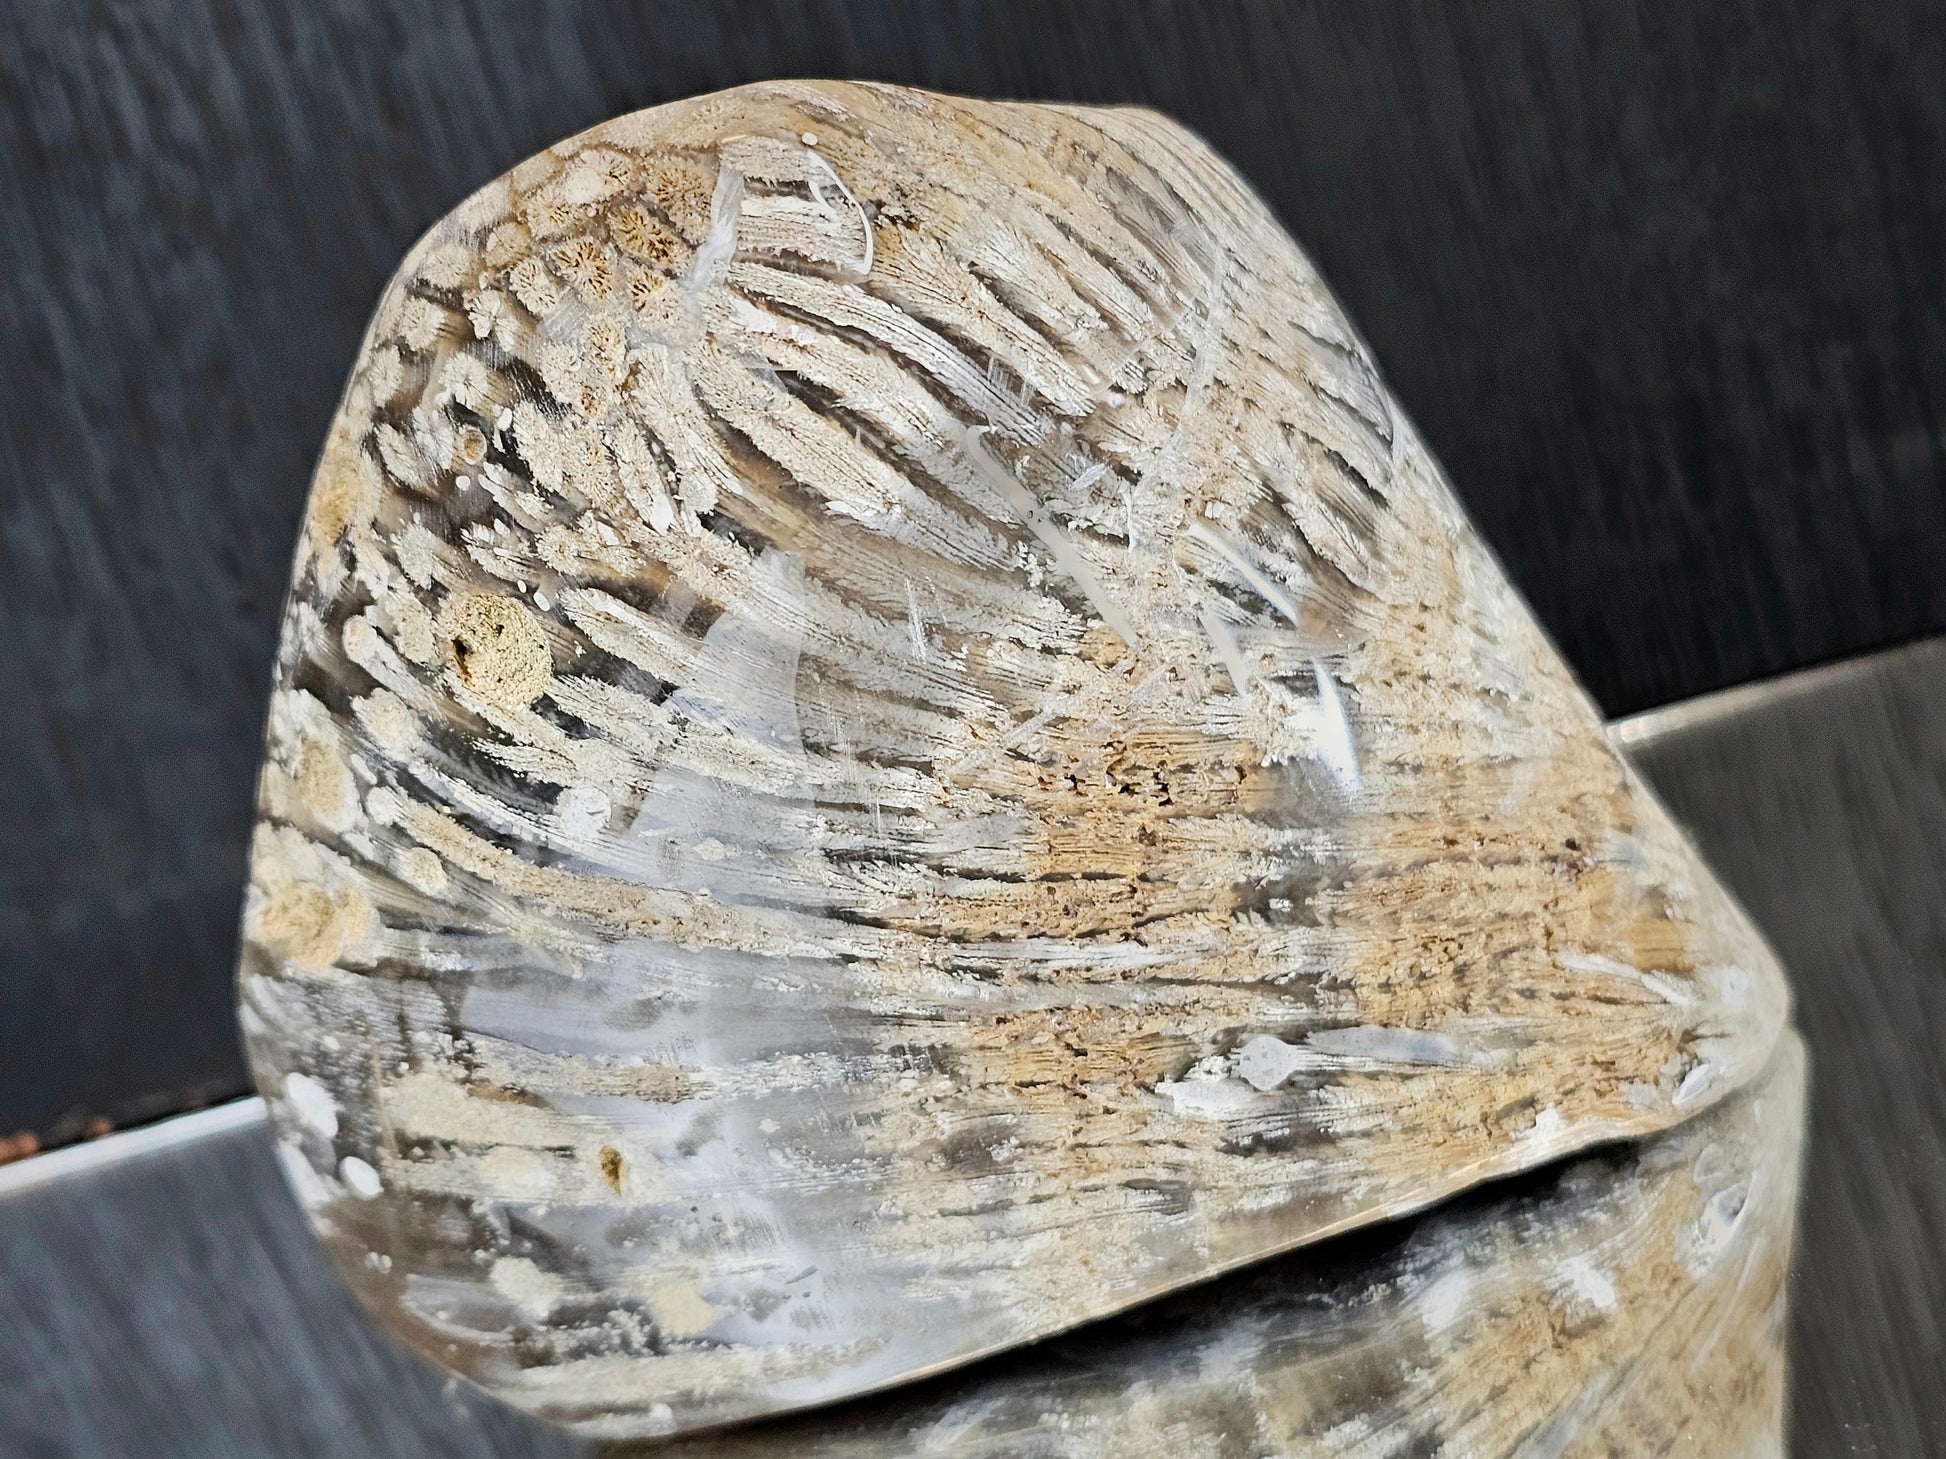 Large Rare Agatised Crystal Fossil Coral, Known locally as Wiltshire / Tisbury Starstone.